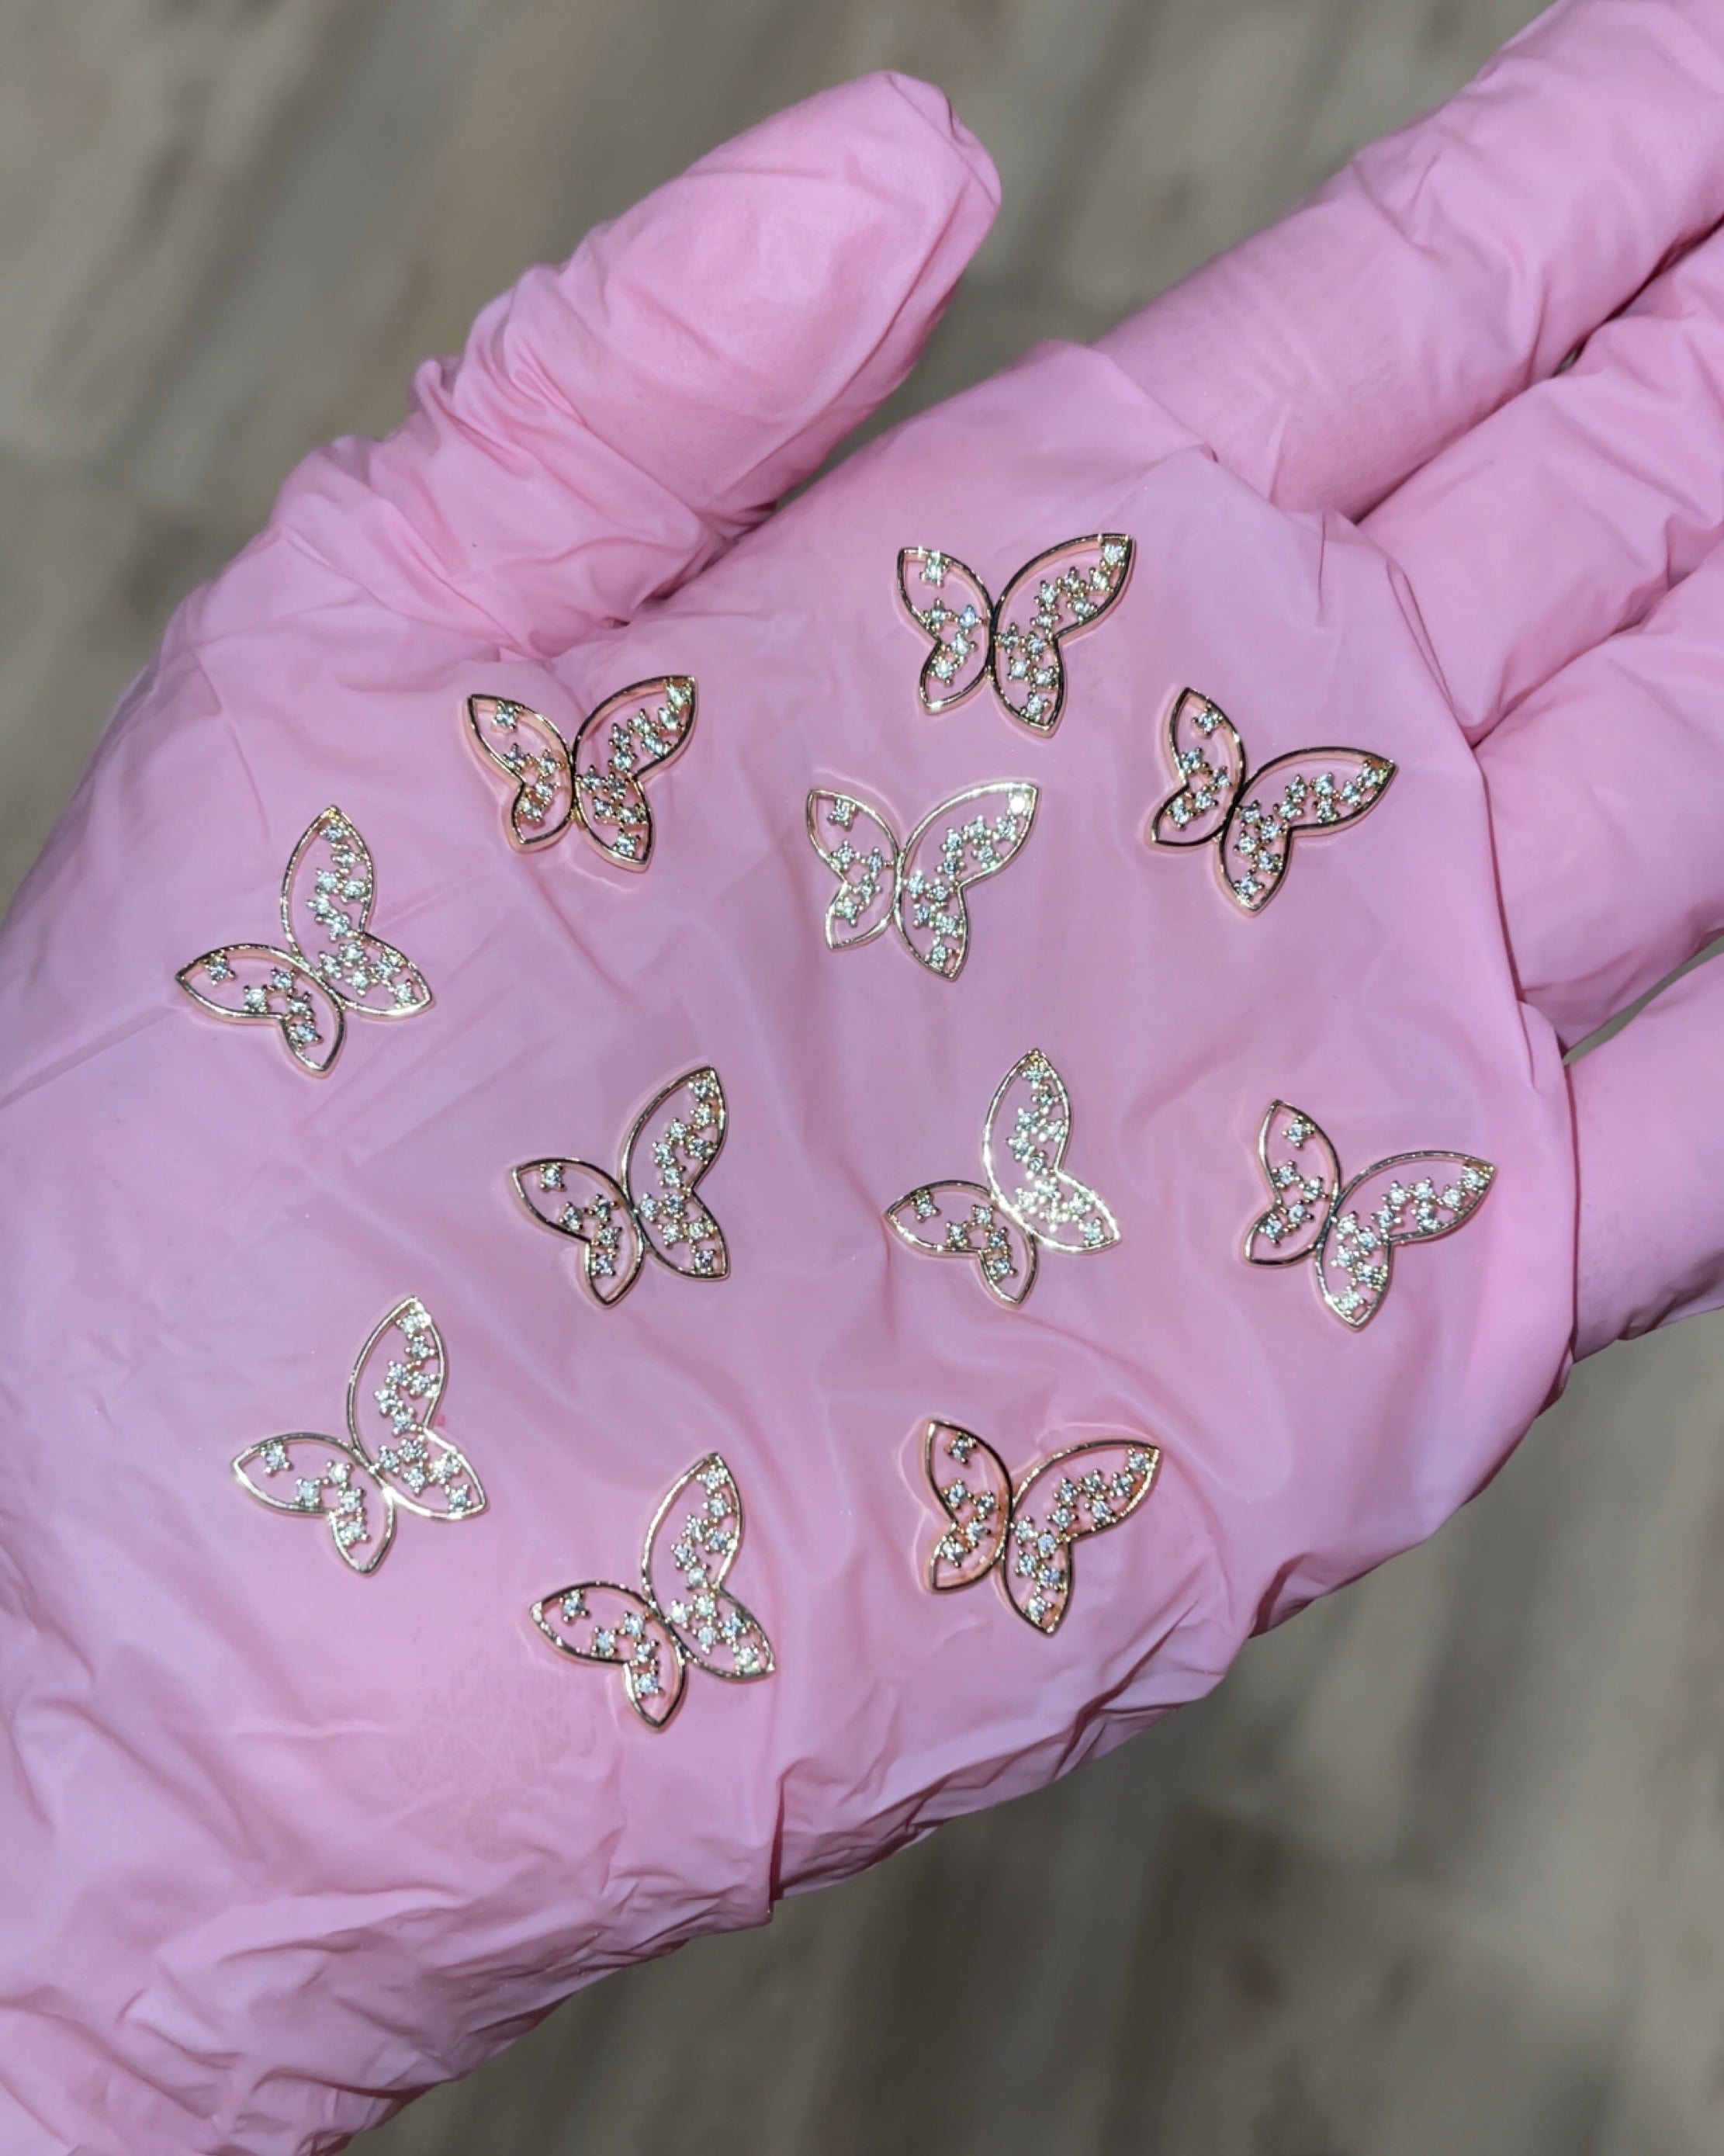 GLISTENING BUTTERFLY CHARMS - 4PCS